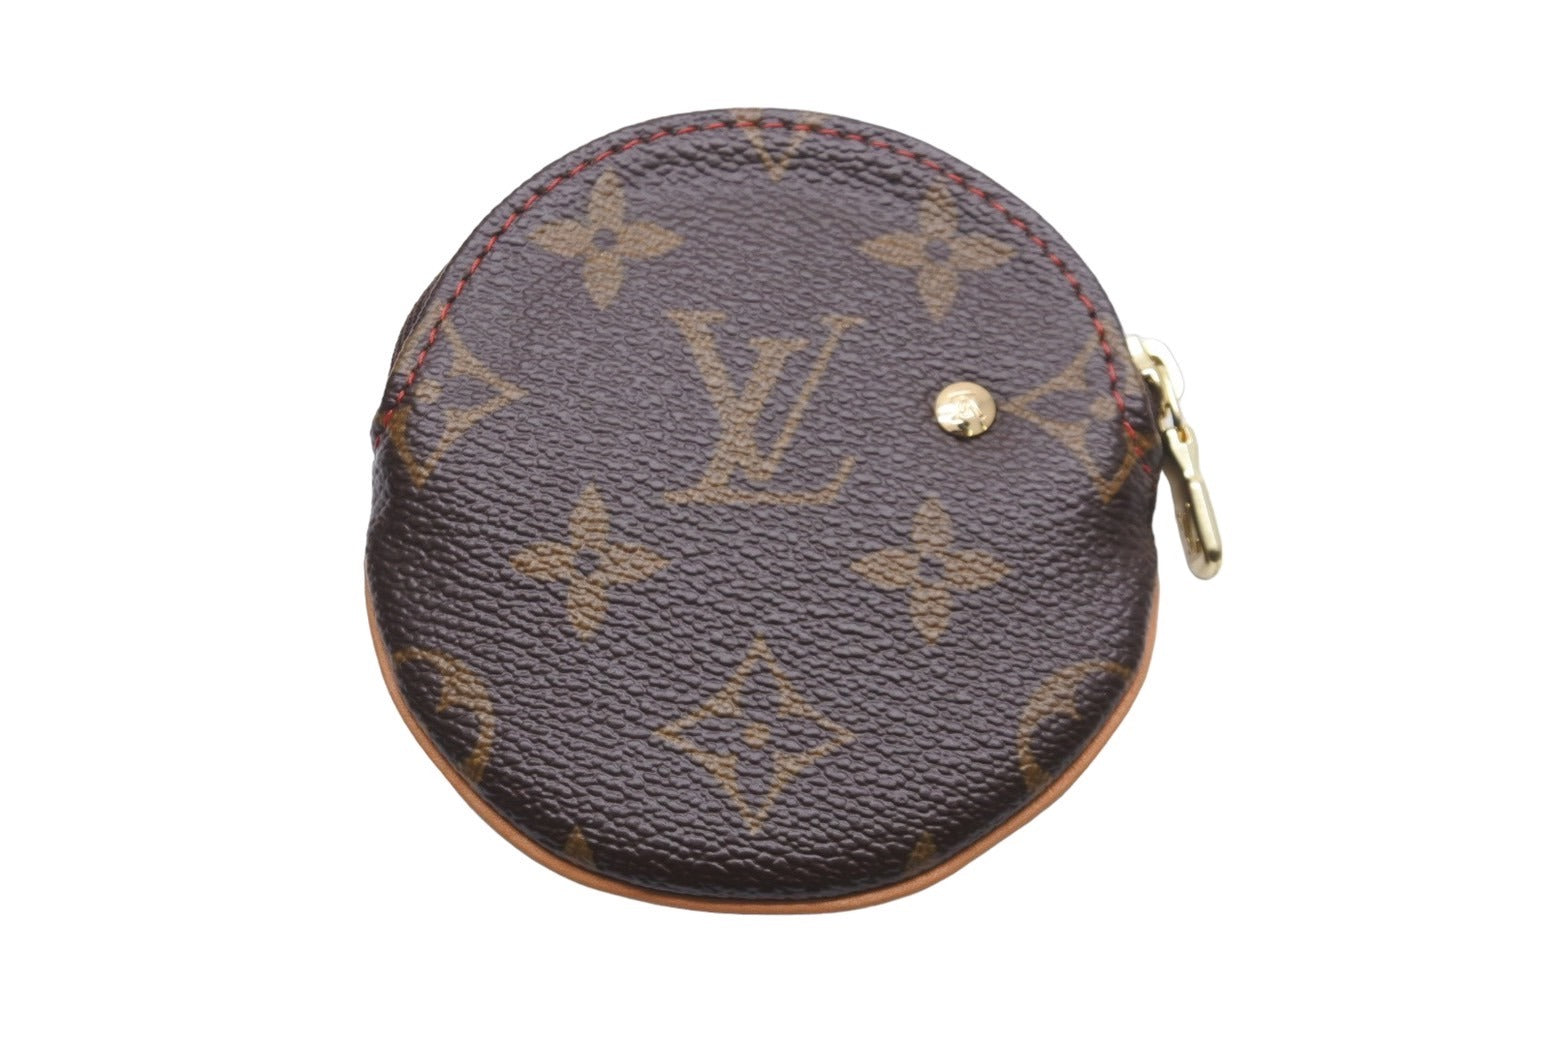 LOUIS VUITTON ルイヴィトン モノグラム チェリー ポルトモネ ロン 丸型 コインケース M95043 ブラウン by